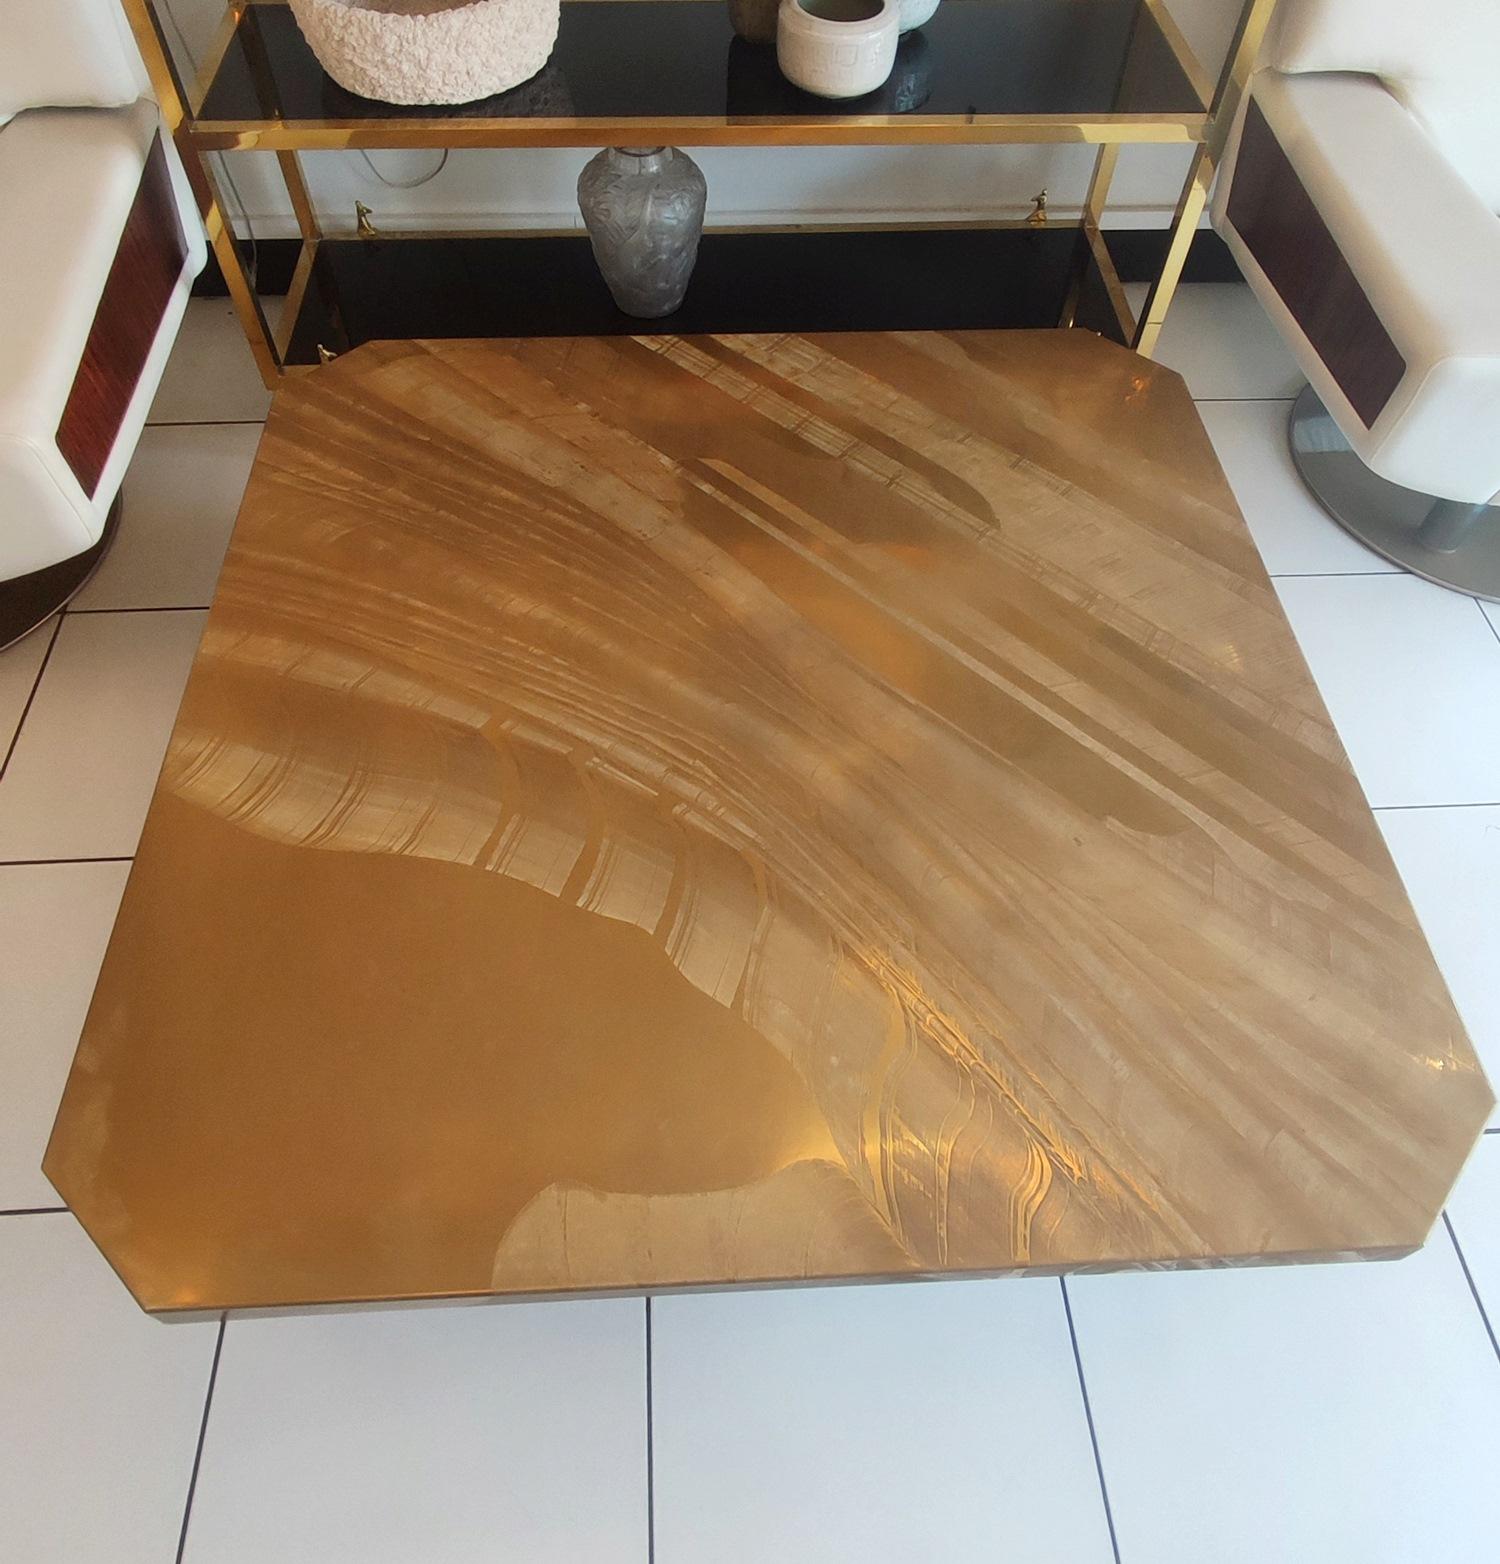 Large Etched Brass Coffee Table by Christian Krekels, signed , circa 1975
with 4 painted black steel feet.